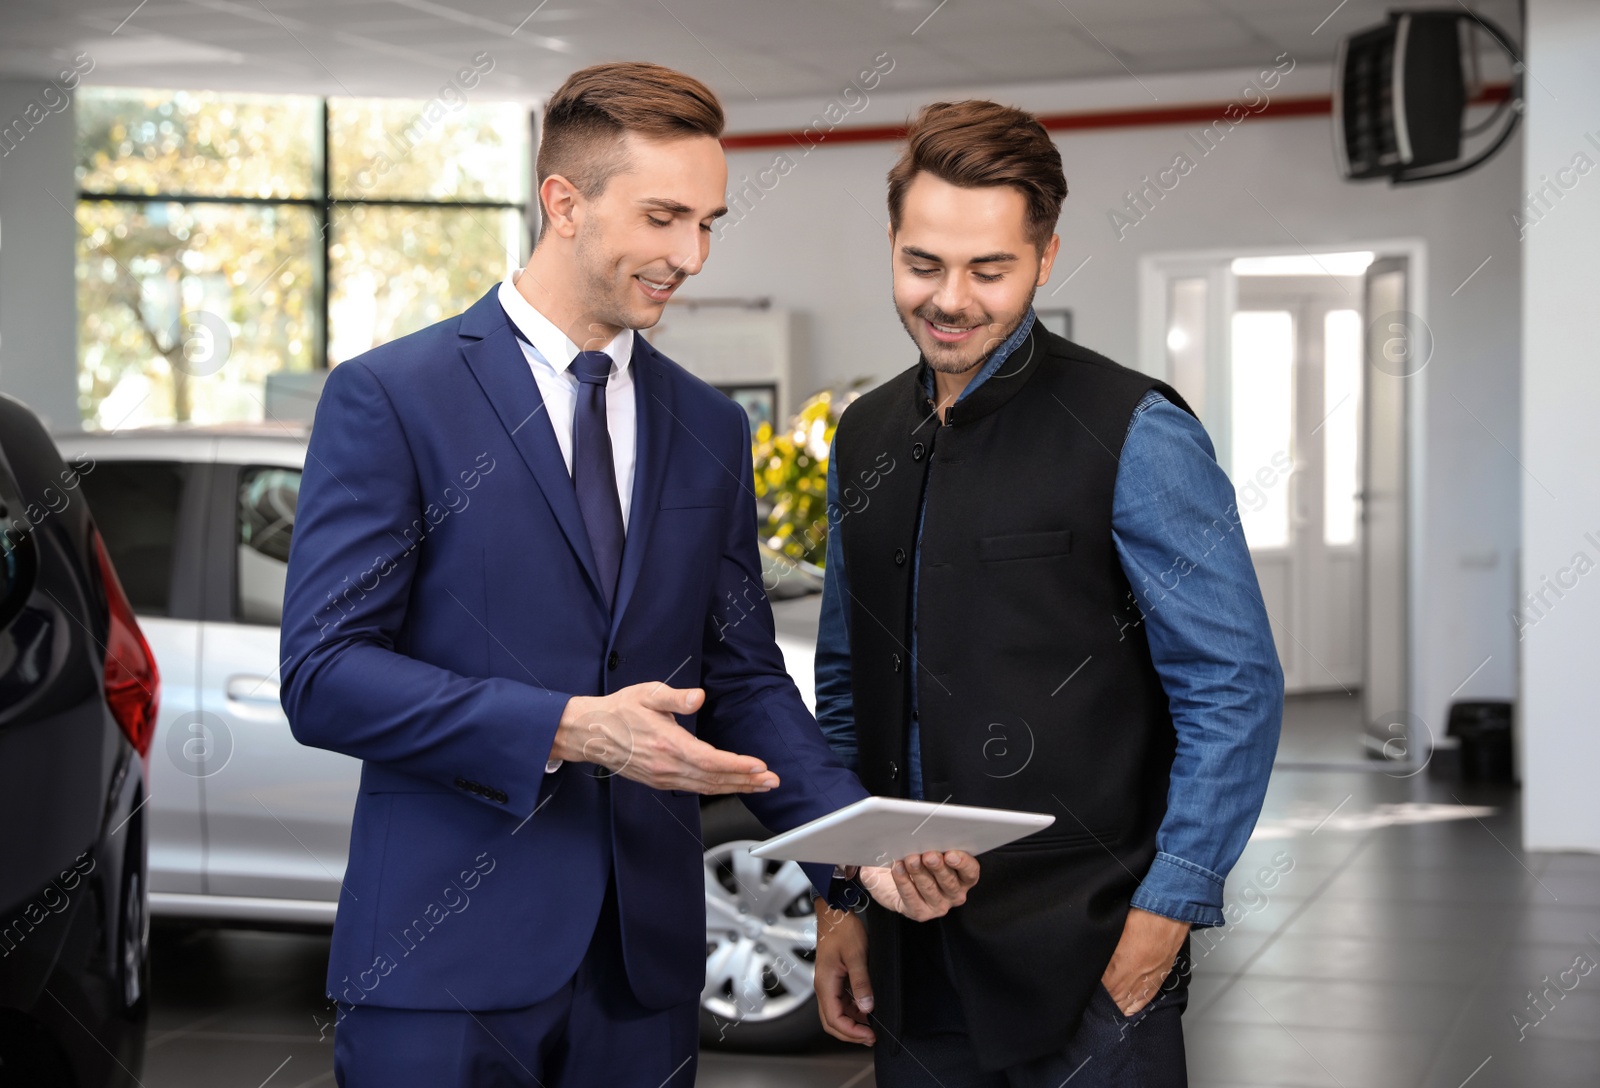 Photo of Young car salesman working with client in dealership